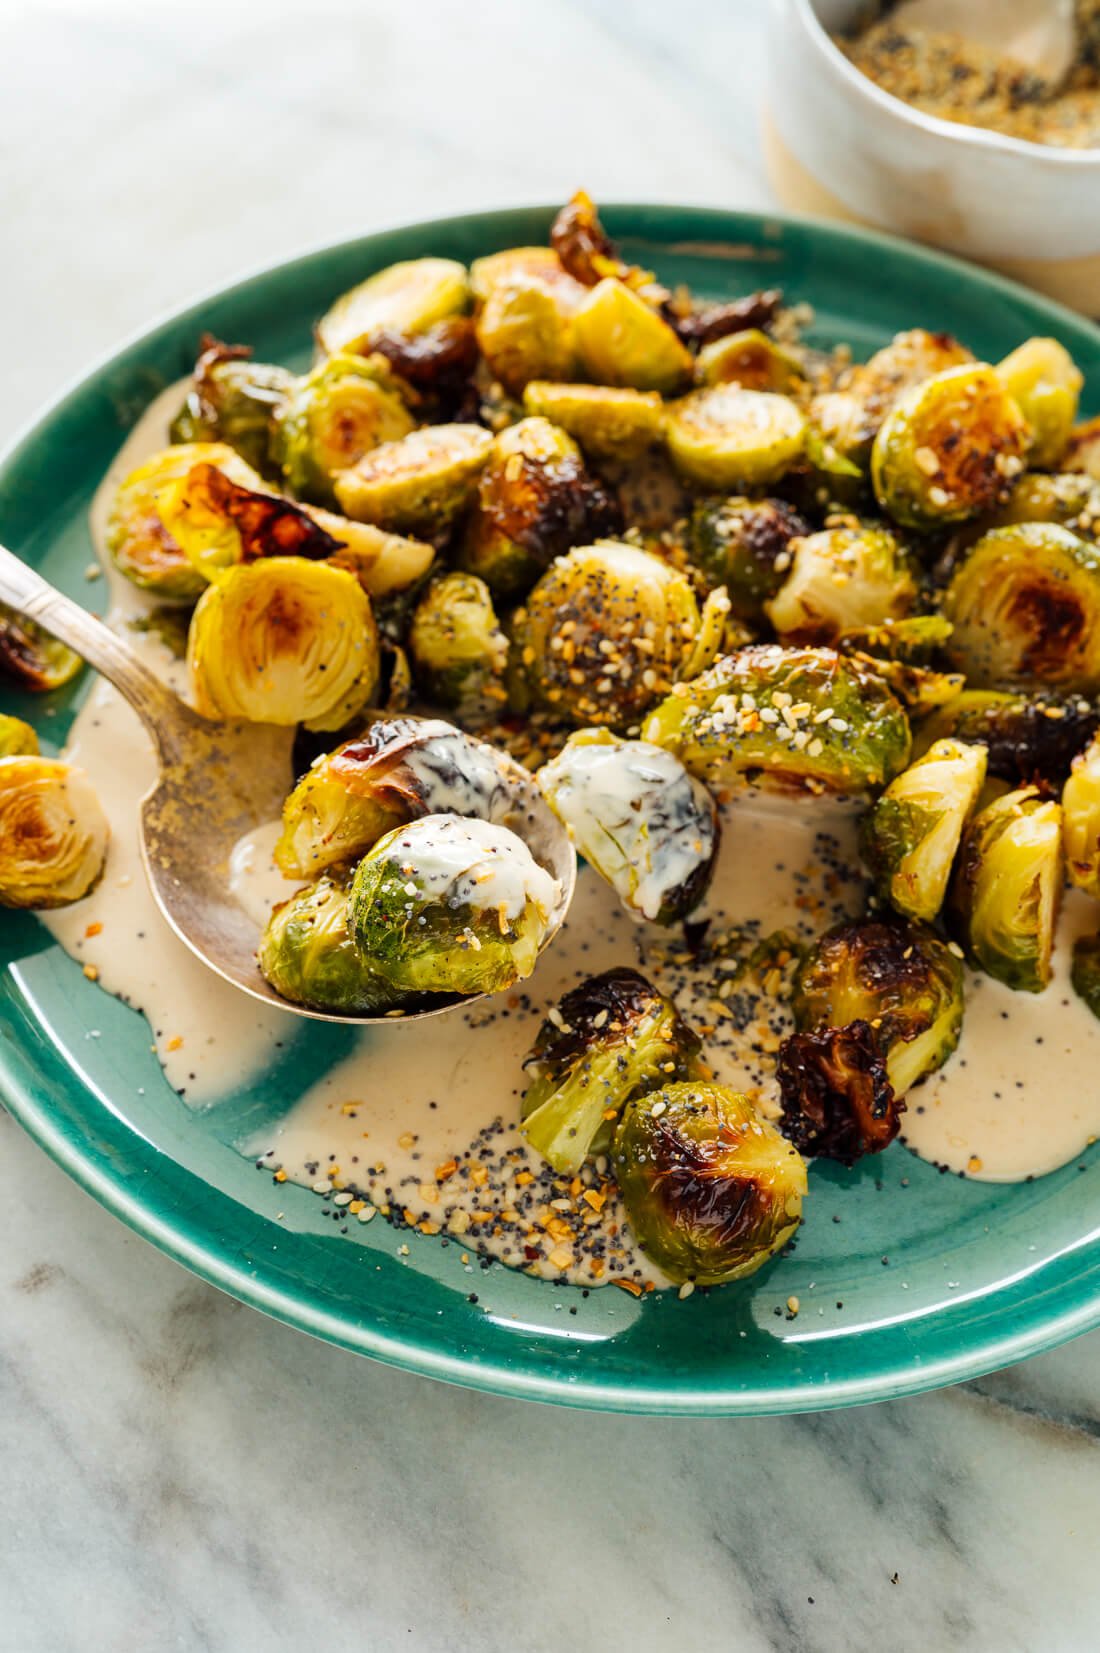 Roasted Brussels sprouts variation with tahini sauce